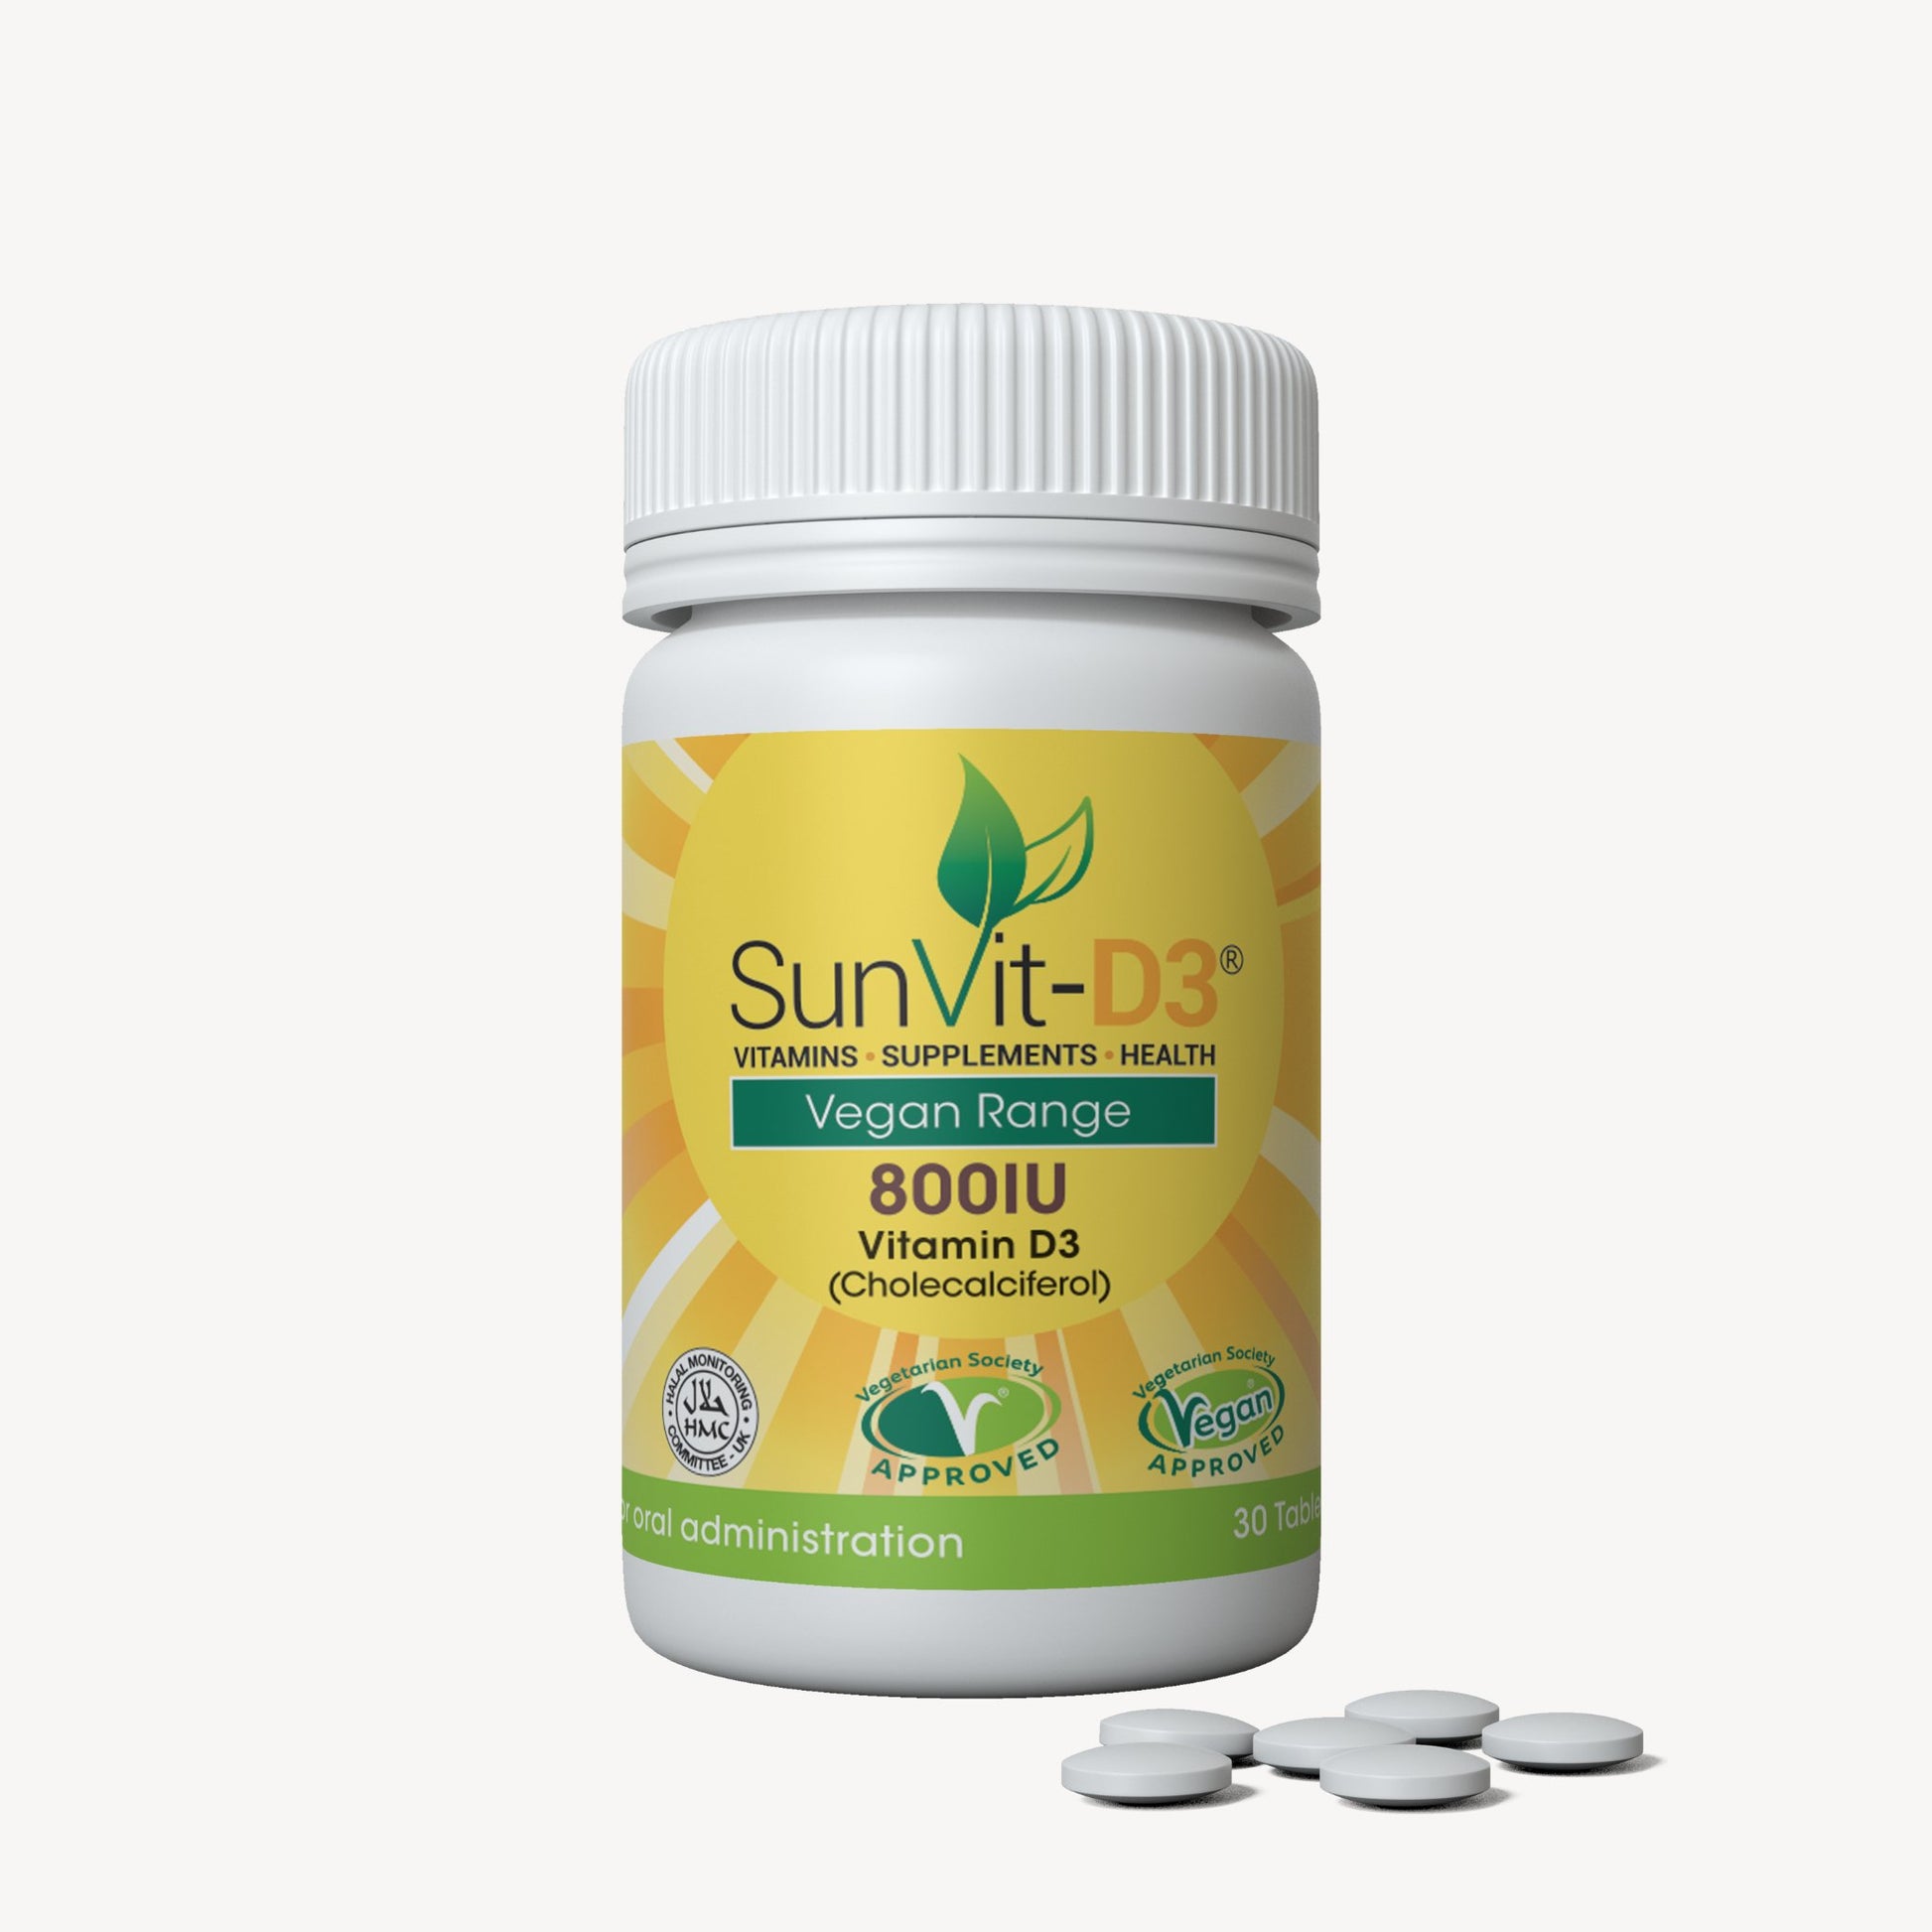 Vitamin D3 800IU (20ug) 30 Convenient Daily Strength Tablets, Natural Plant Based - SunVit-D3